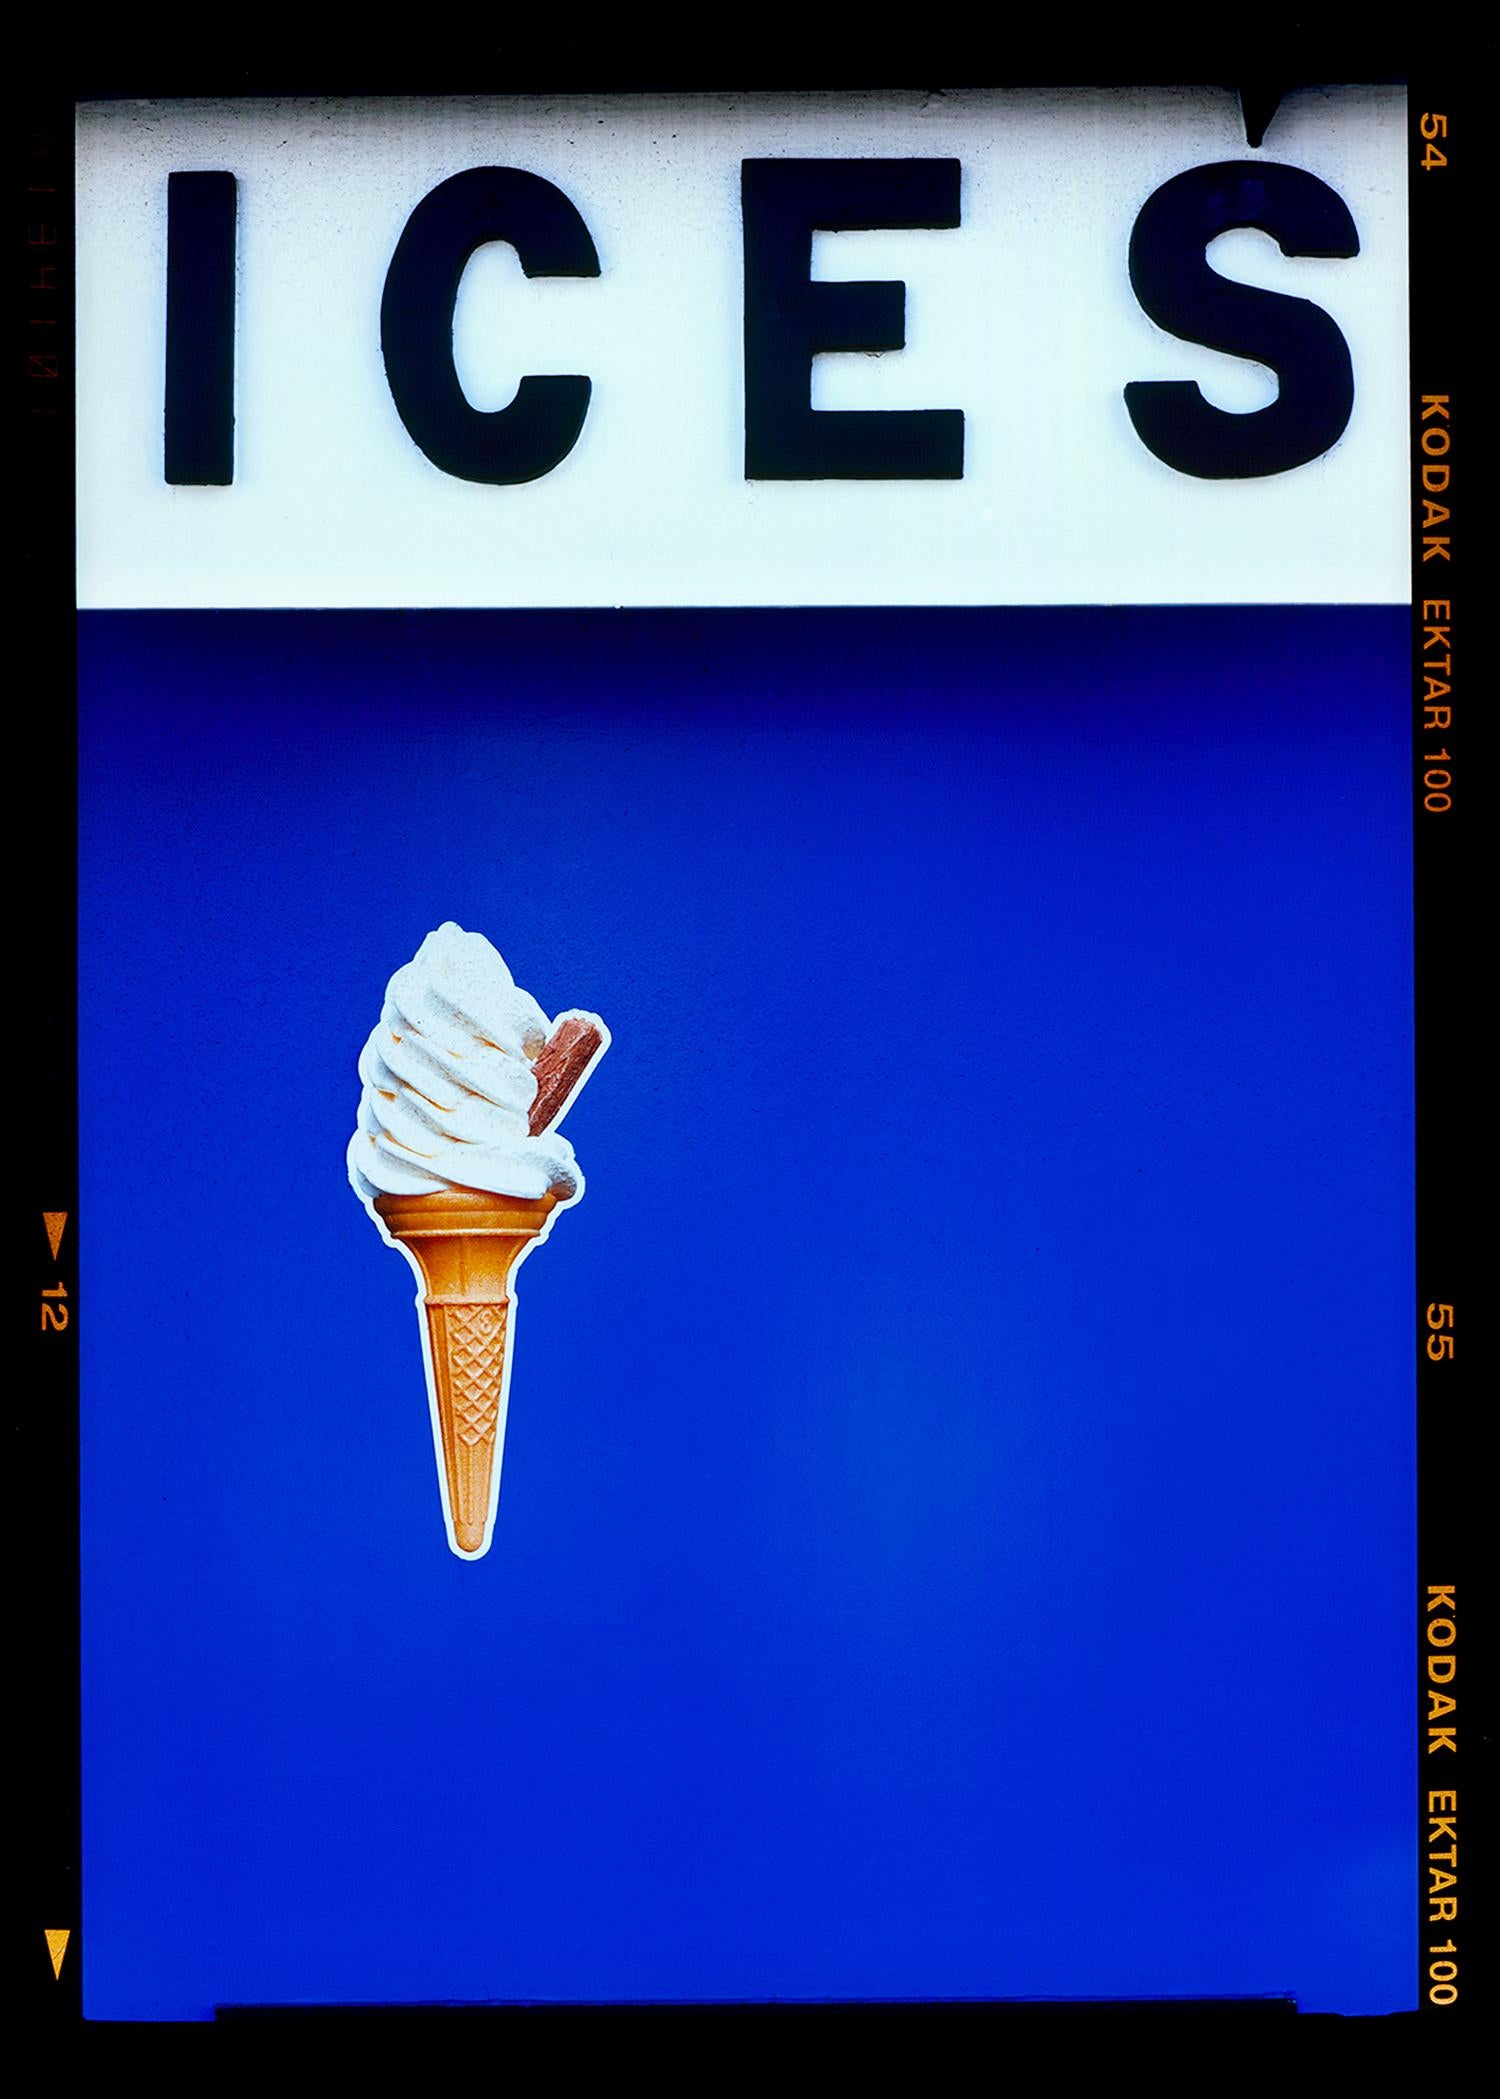 Richard Heeps Color Photograph - Ices (Blue), Bexhill-on-Sea - British seaside color photography